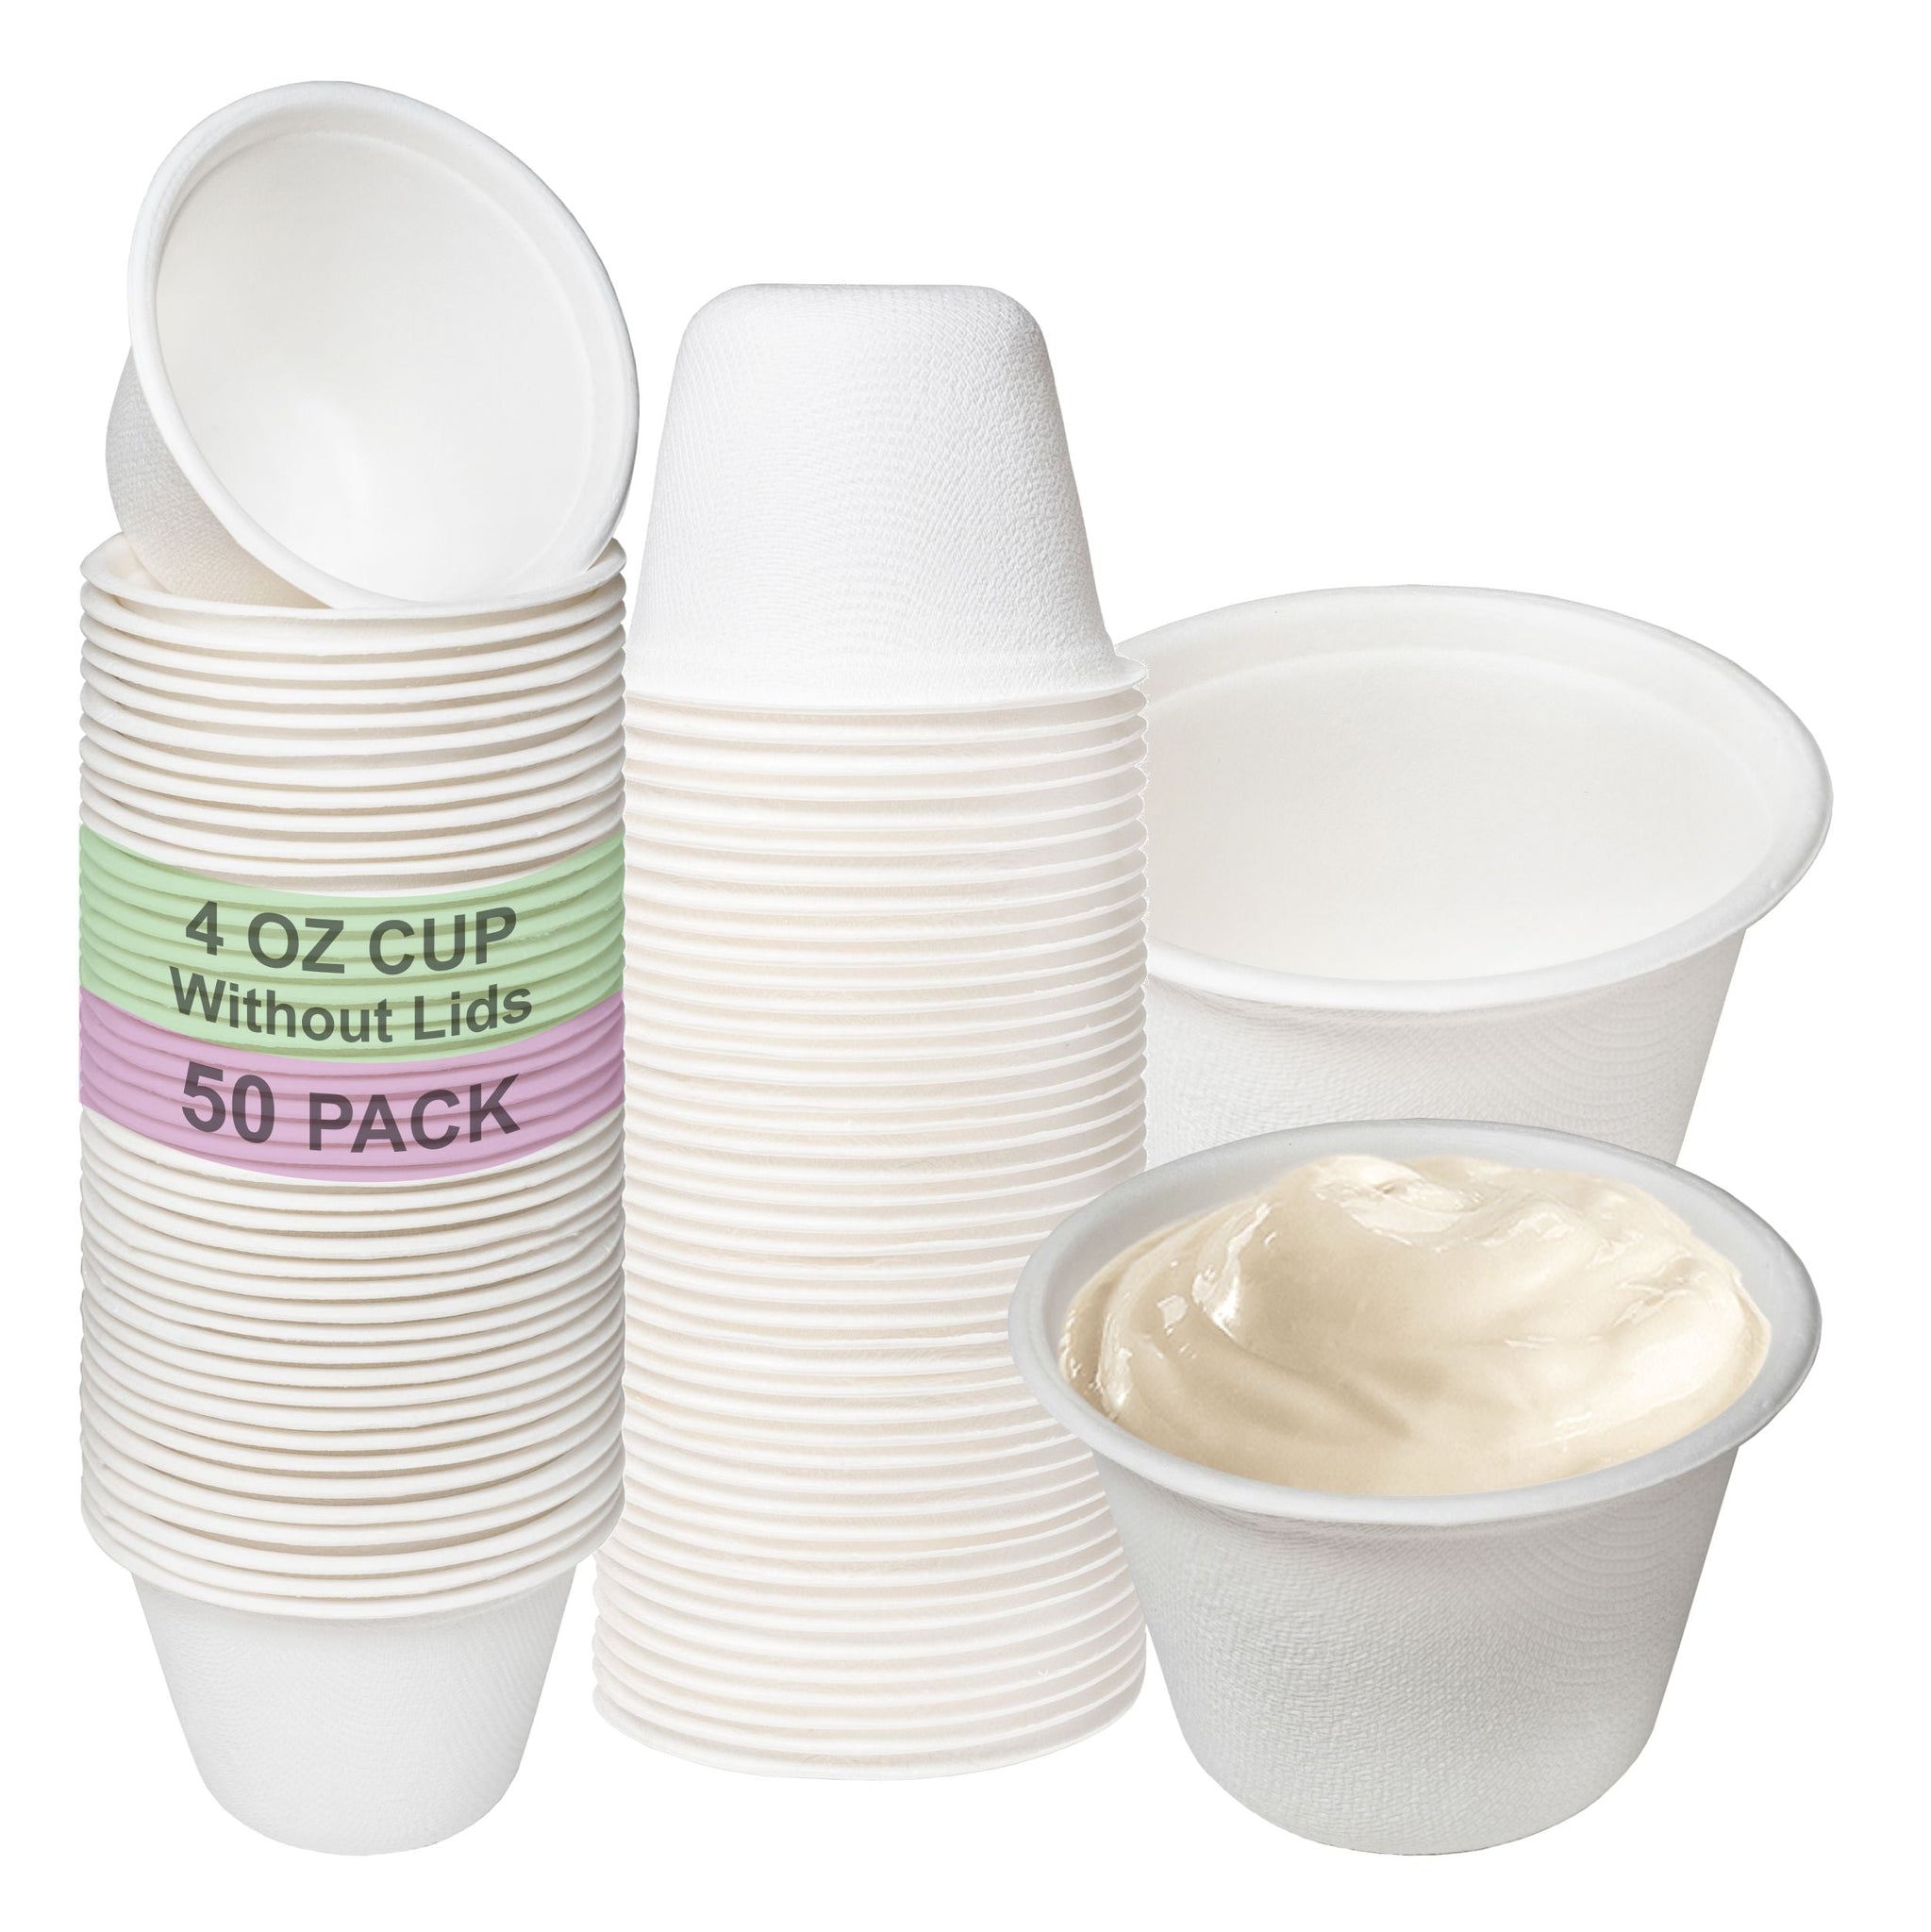 white  travel size cup  to go take out delivery  souffle  smallpapercups  shotcups  servingcups  Sauce Cups  samplecups  Salad Dressing  restaurant fast food  Portion Dipping Cups  pillcup  papercups  Paper Ice Cream Cups  mouthwash cups  medicinecup  Measuring Cups  leakproof  Leak Resistant  ketchup Cups  jello shot slime  Food Storage  DIYpapercups  disposableshot  Disposable Portion Cups  condiment cups  Compostable  Bagasse  artsandcraft  2 ounce cup